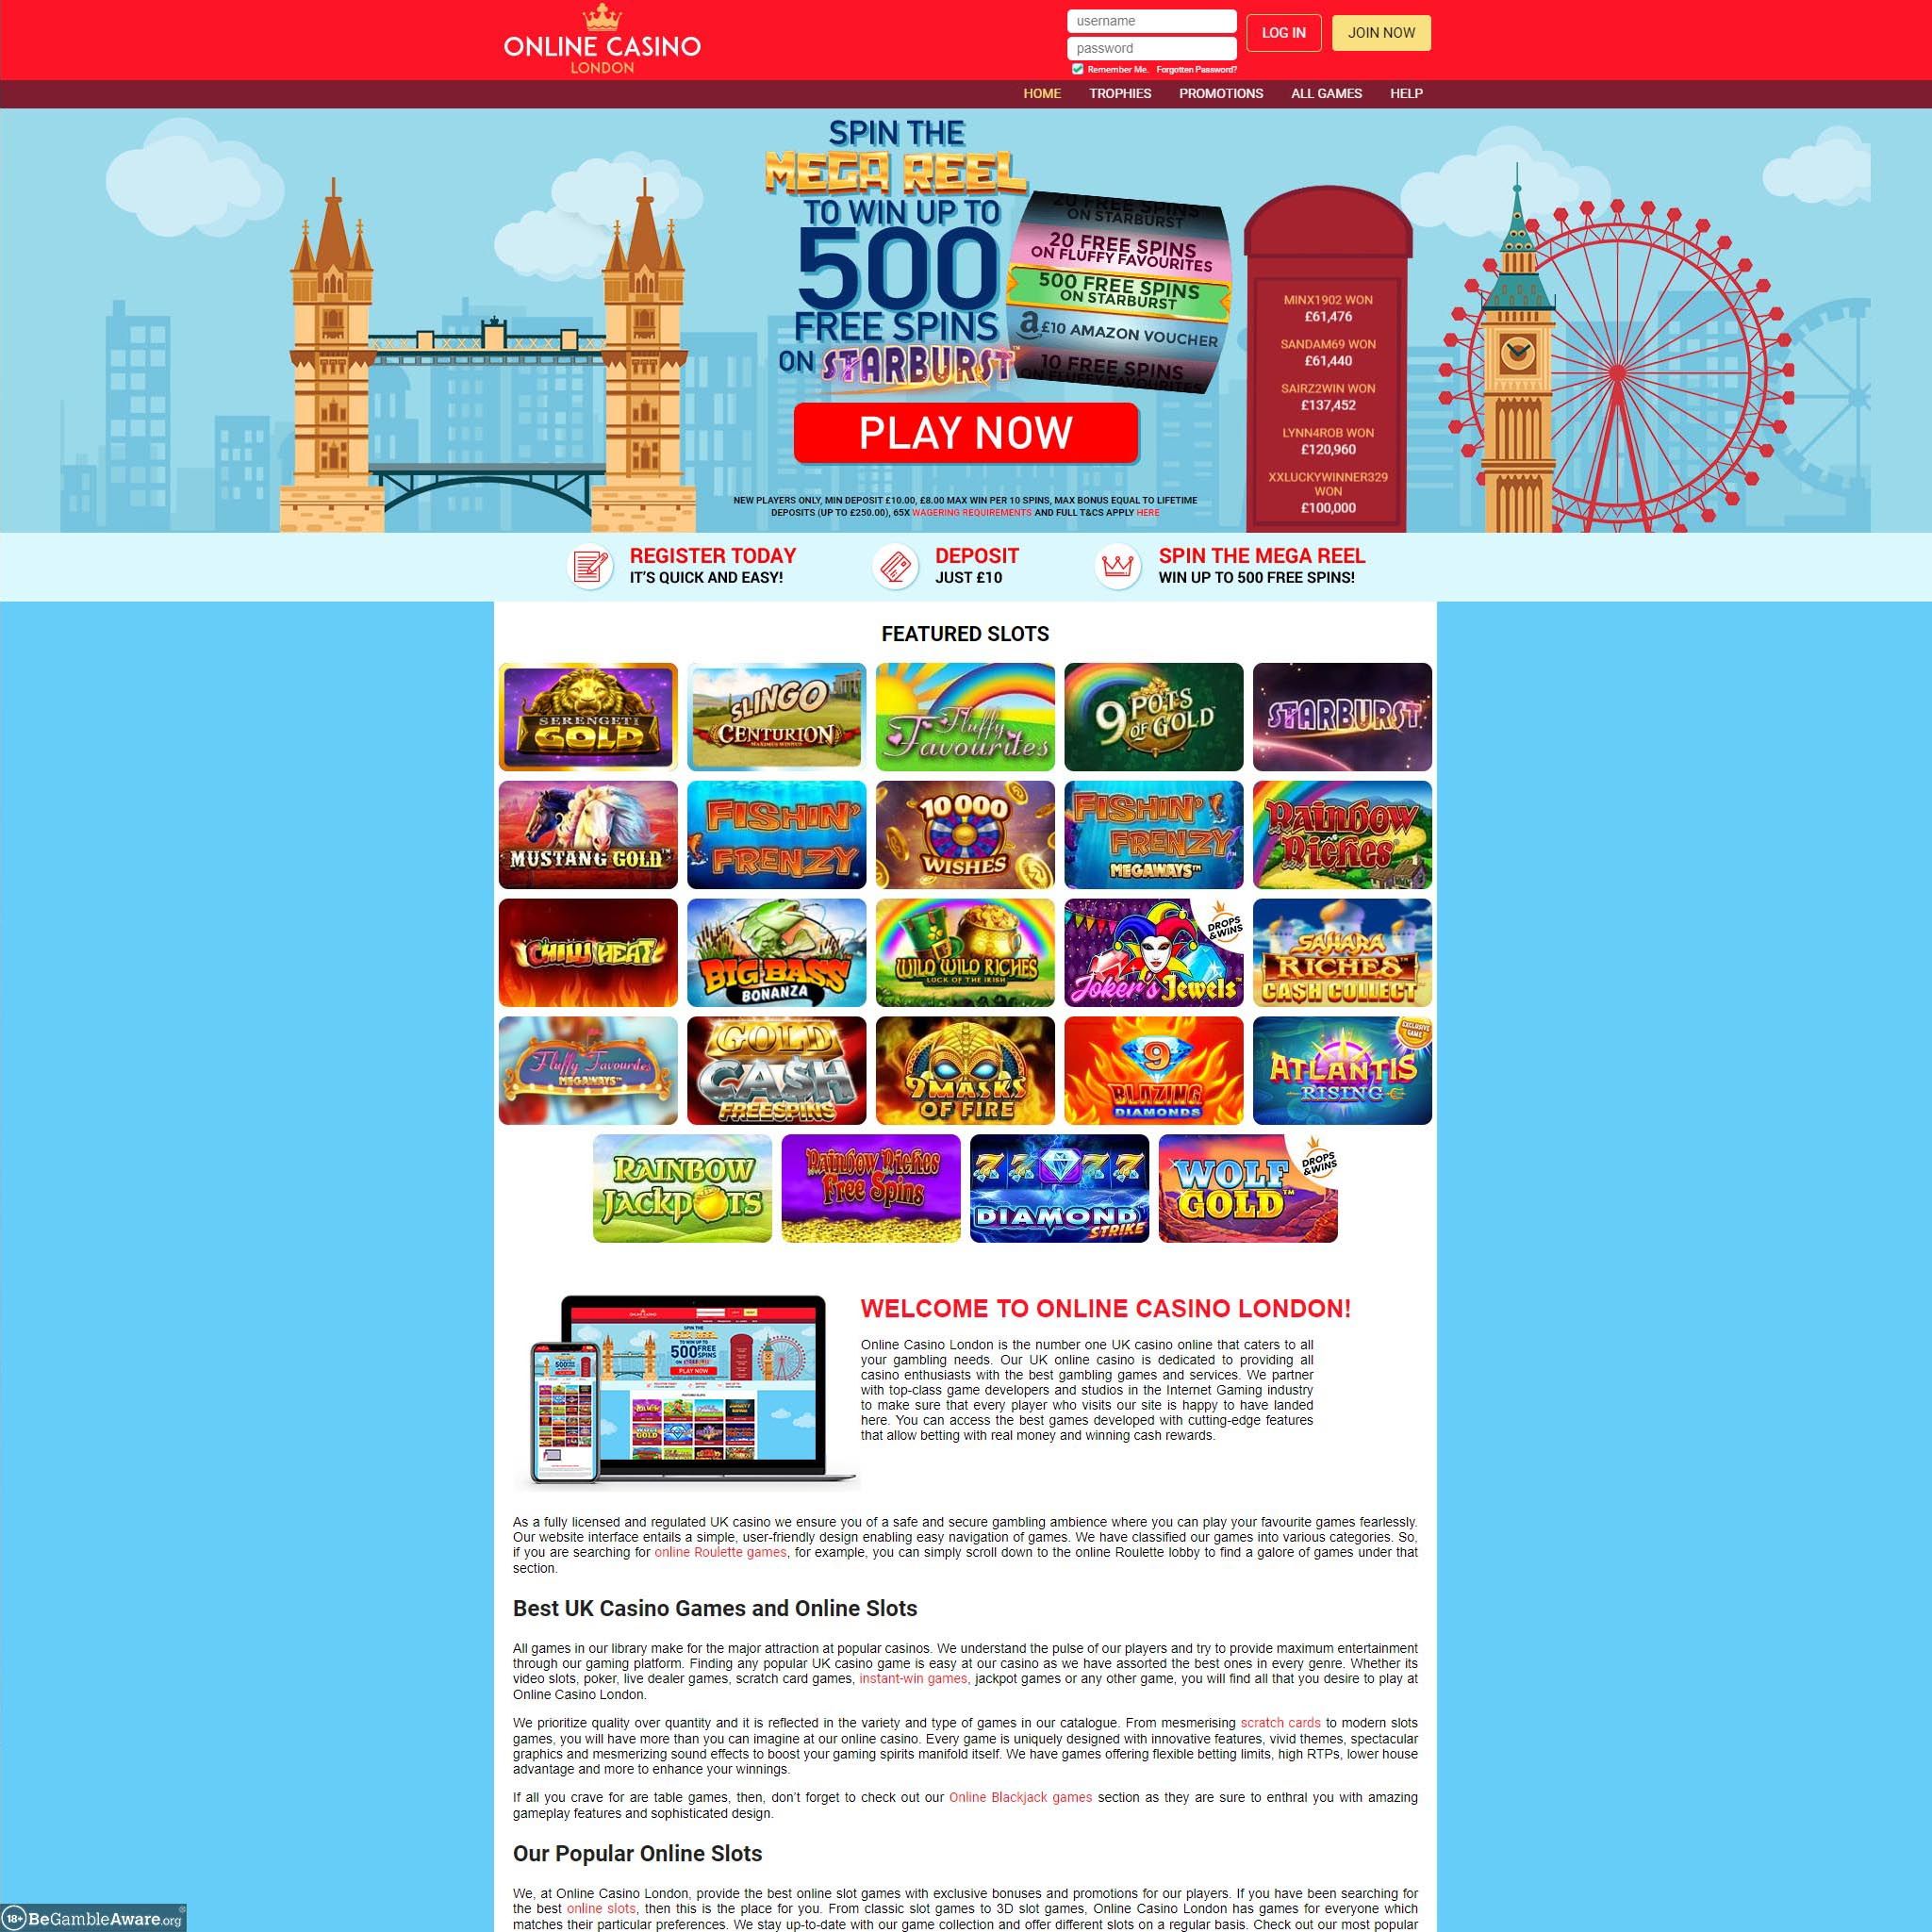 Online Casino London review